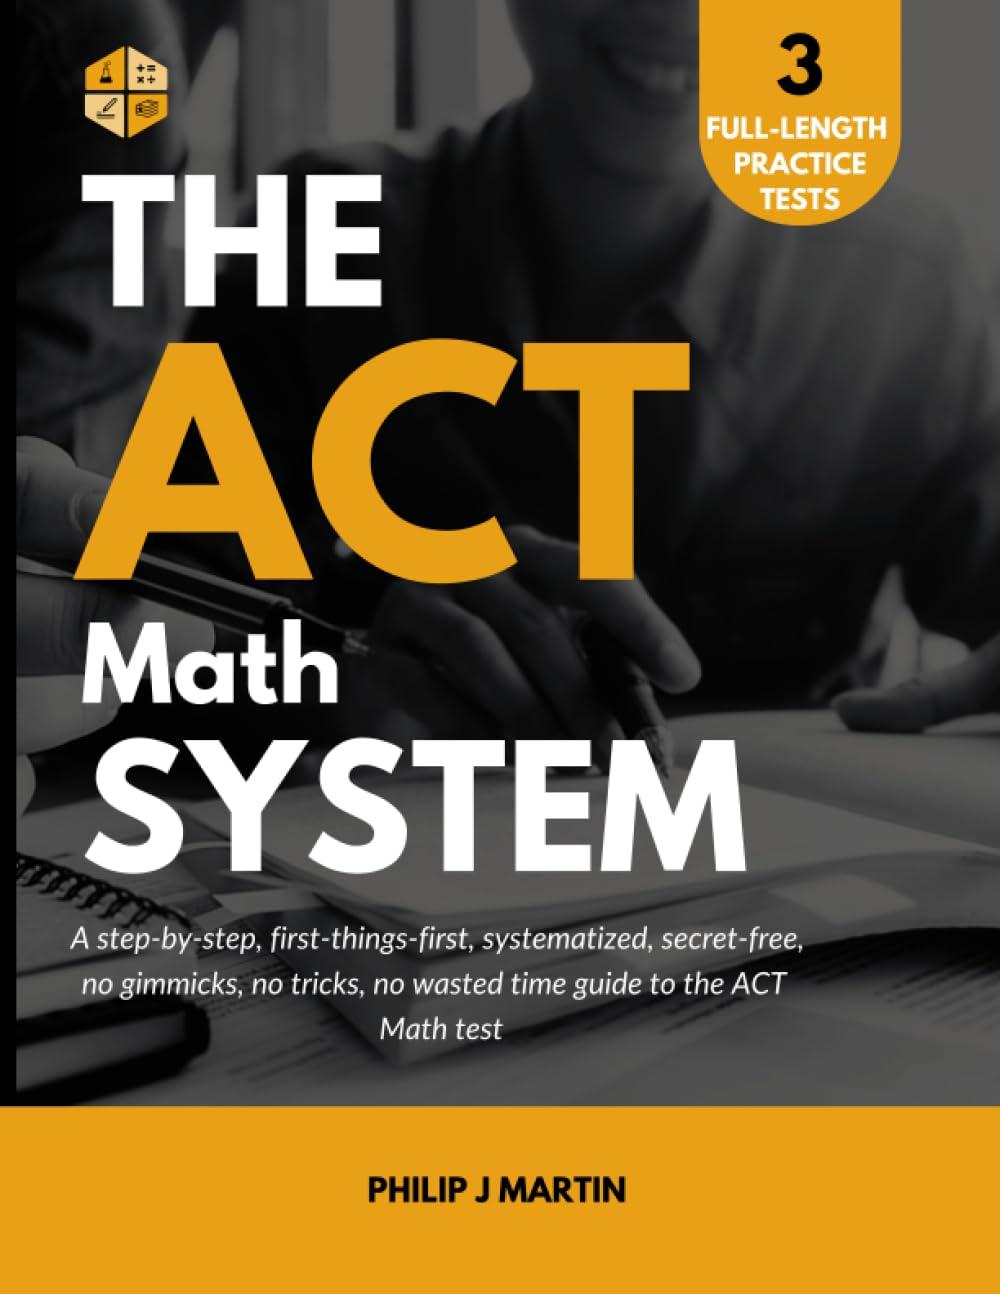 the act math system a systematized step by step first things first no gimmicks or tricks secret free no